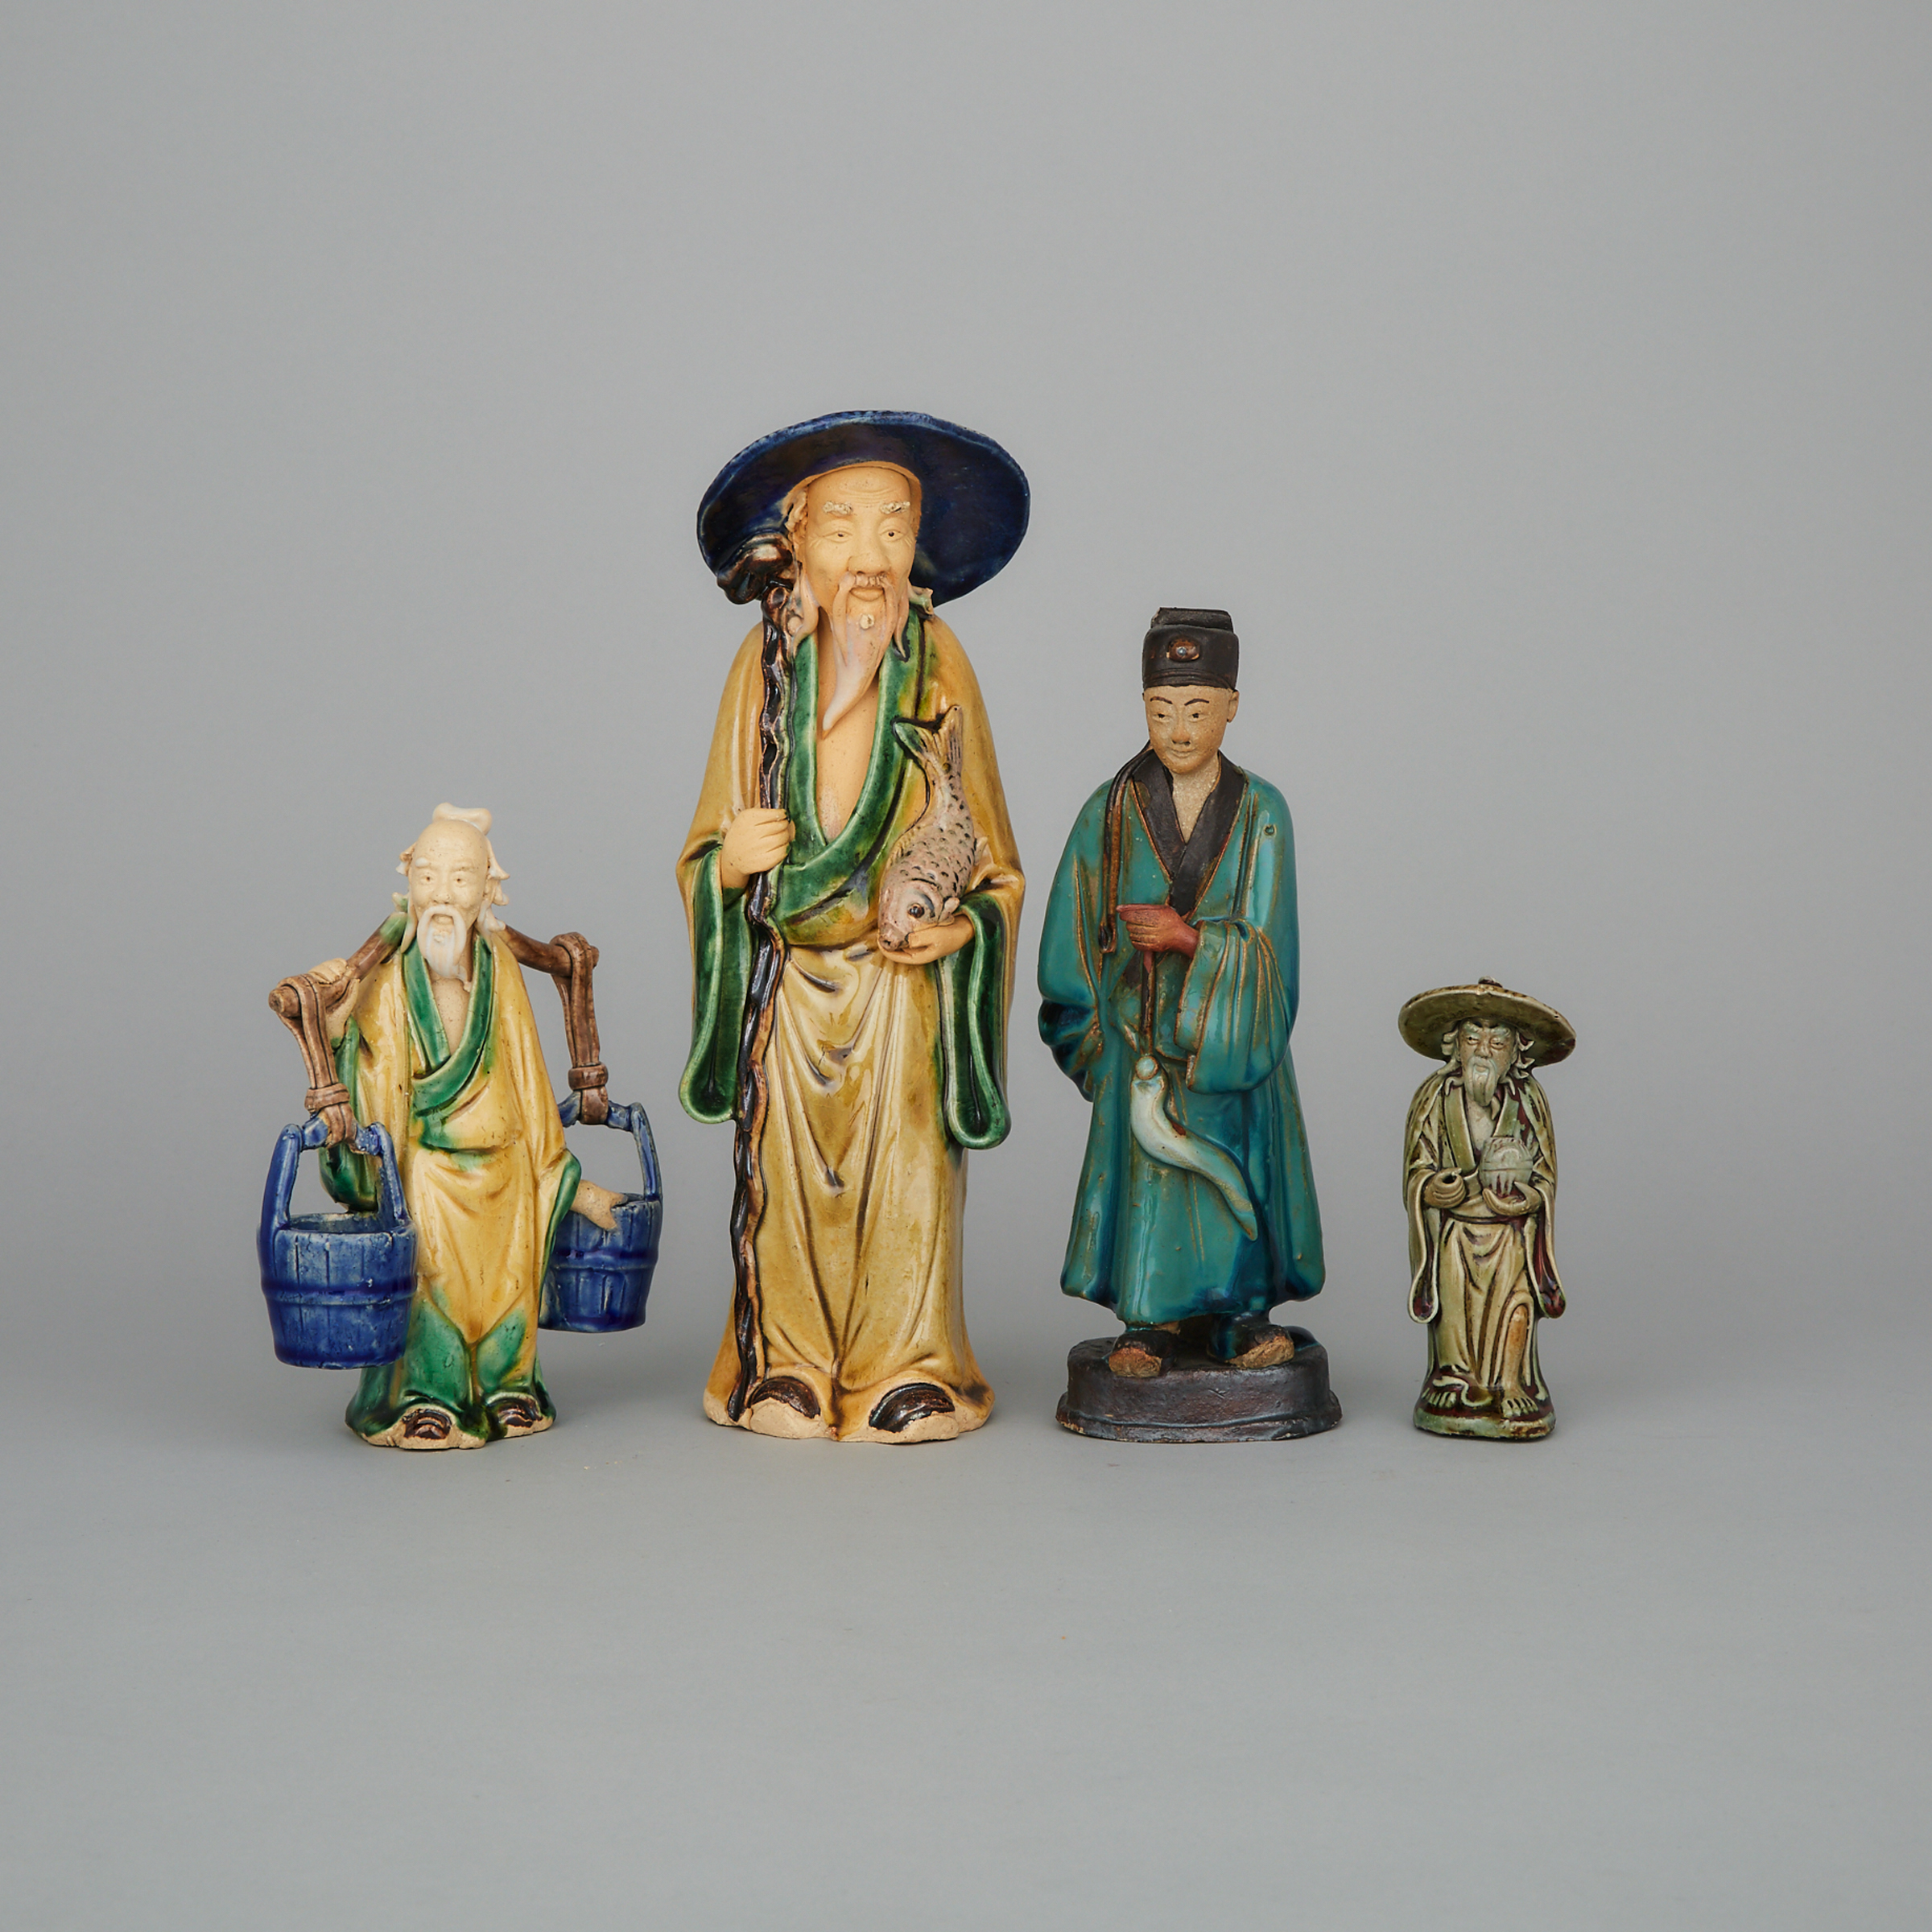 A Group of Four Shekwan Figures